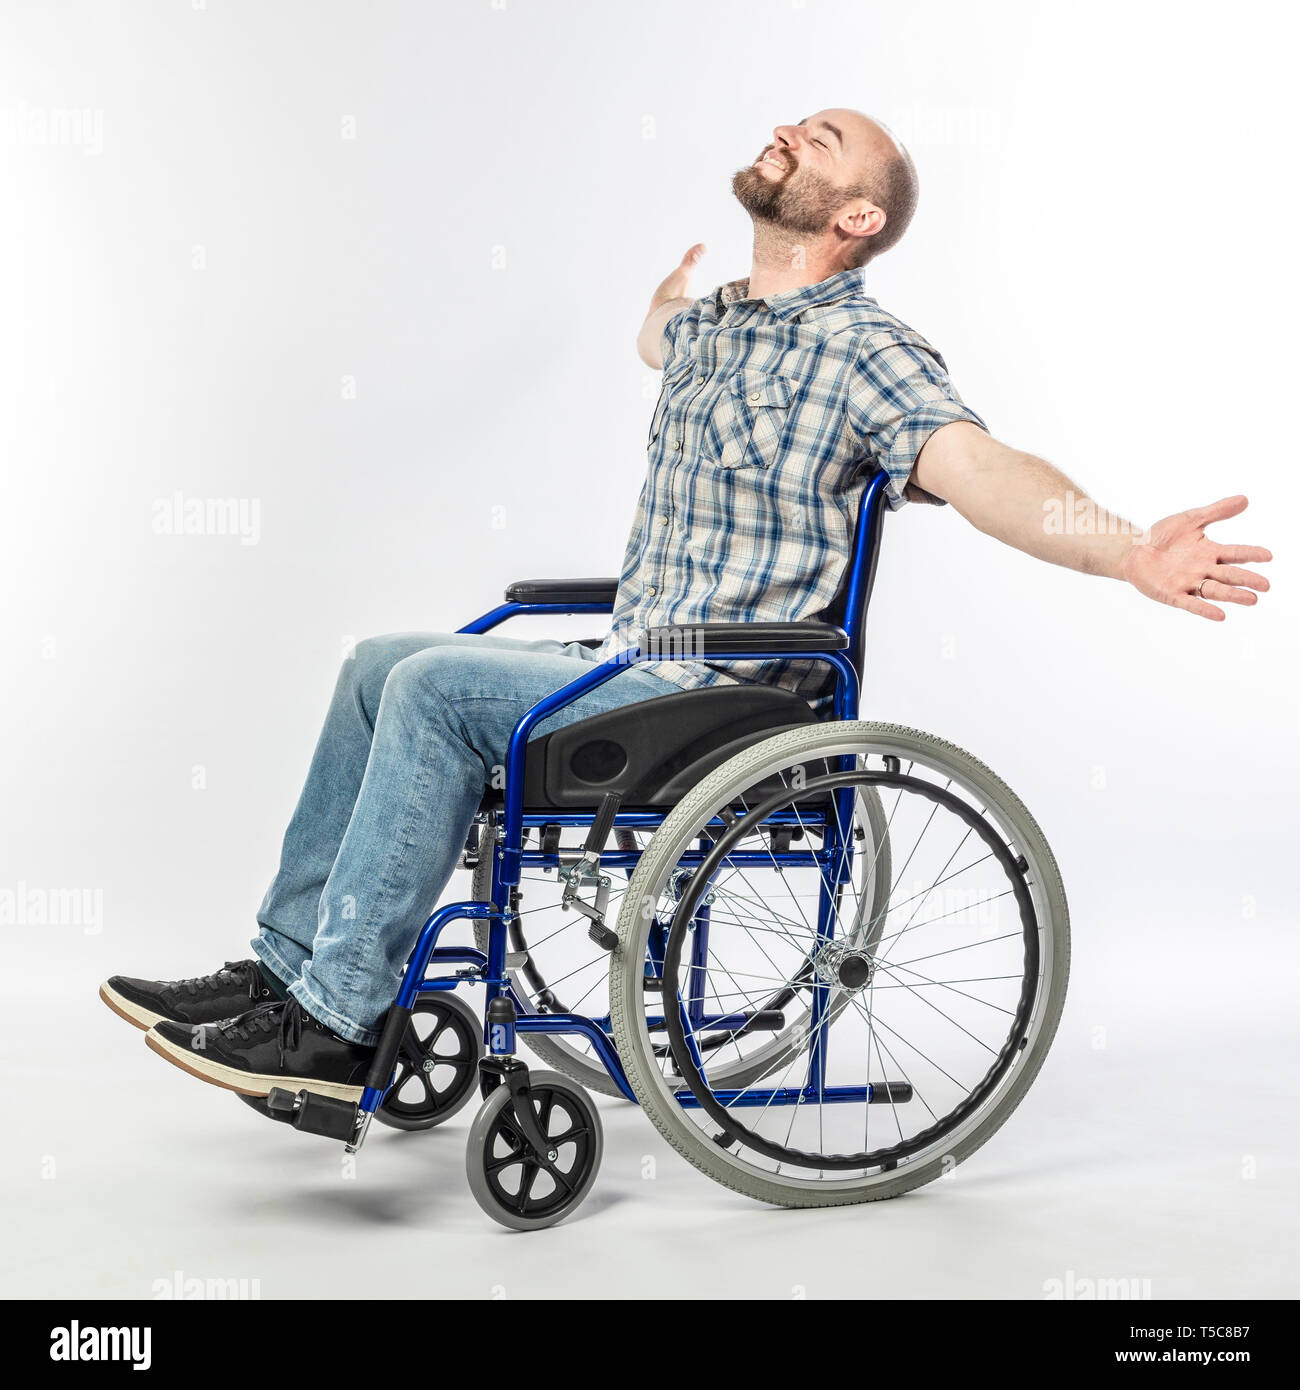 Man sitting in a wheelchair with arms raised and eyes closed. smiling and positive expression. Stock Photo